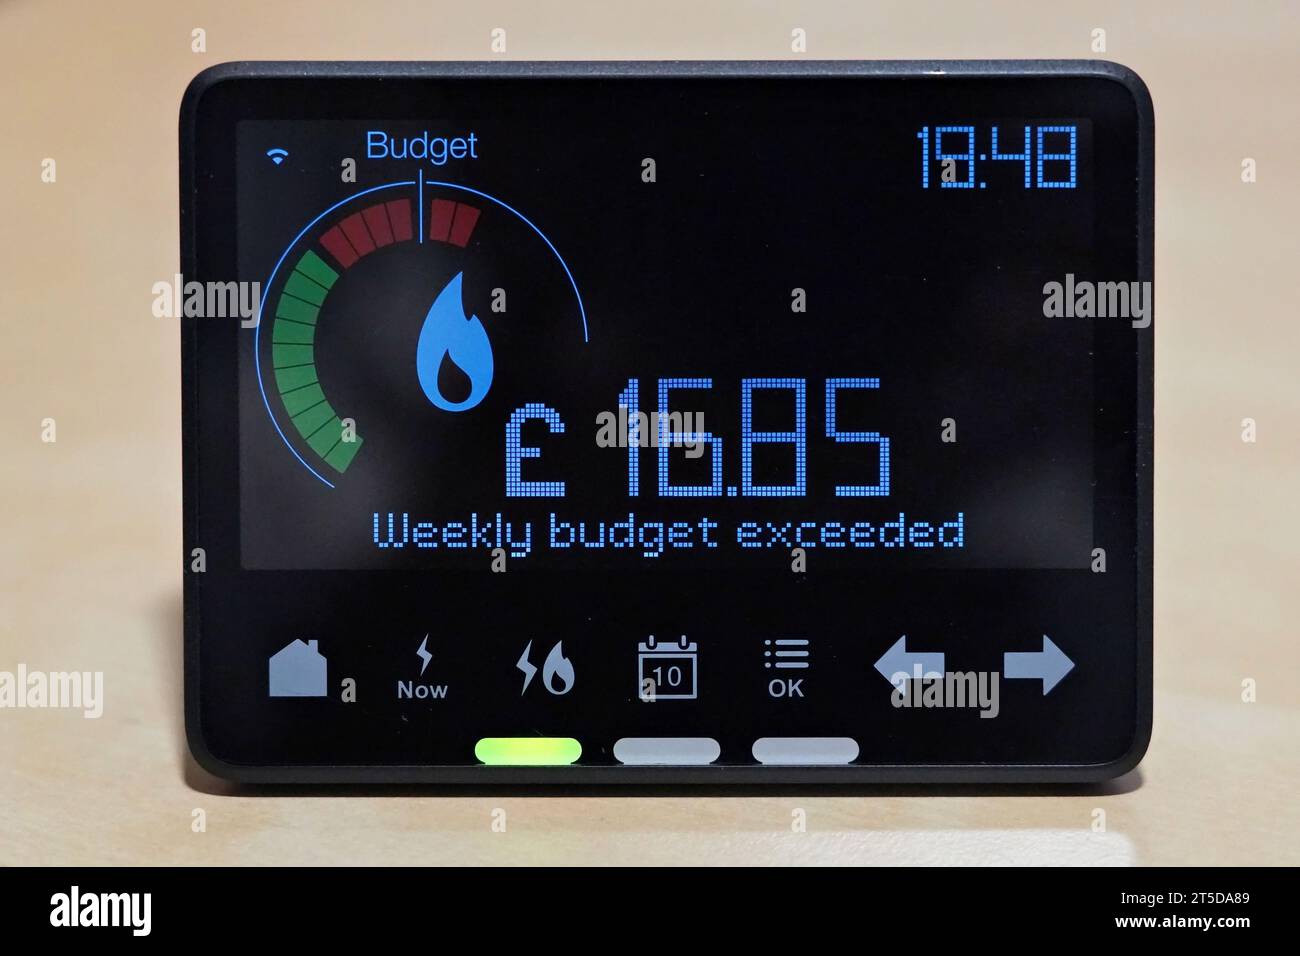 Smart energy meter showing gas usage & that the weekly budget has been exceeded Stock Photo